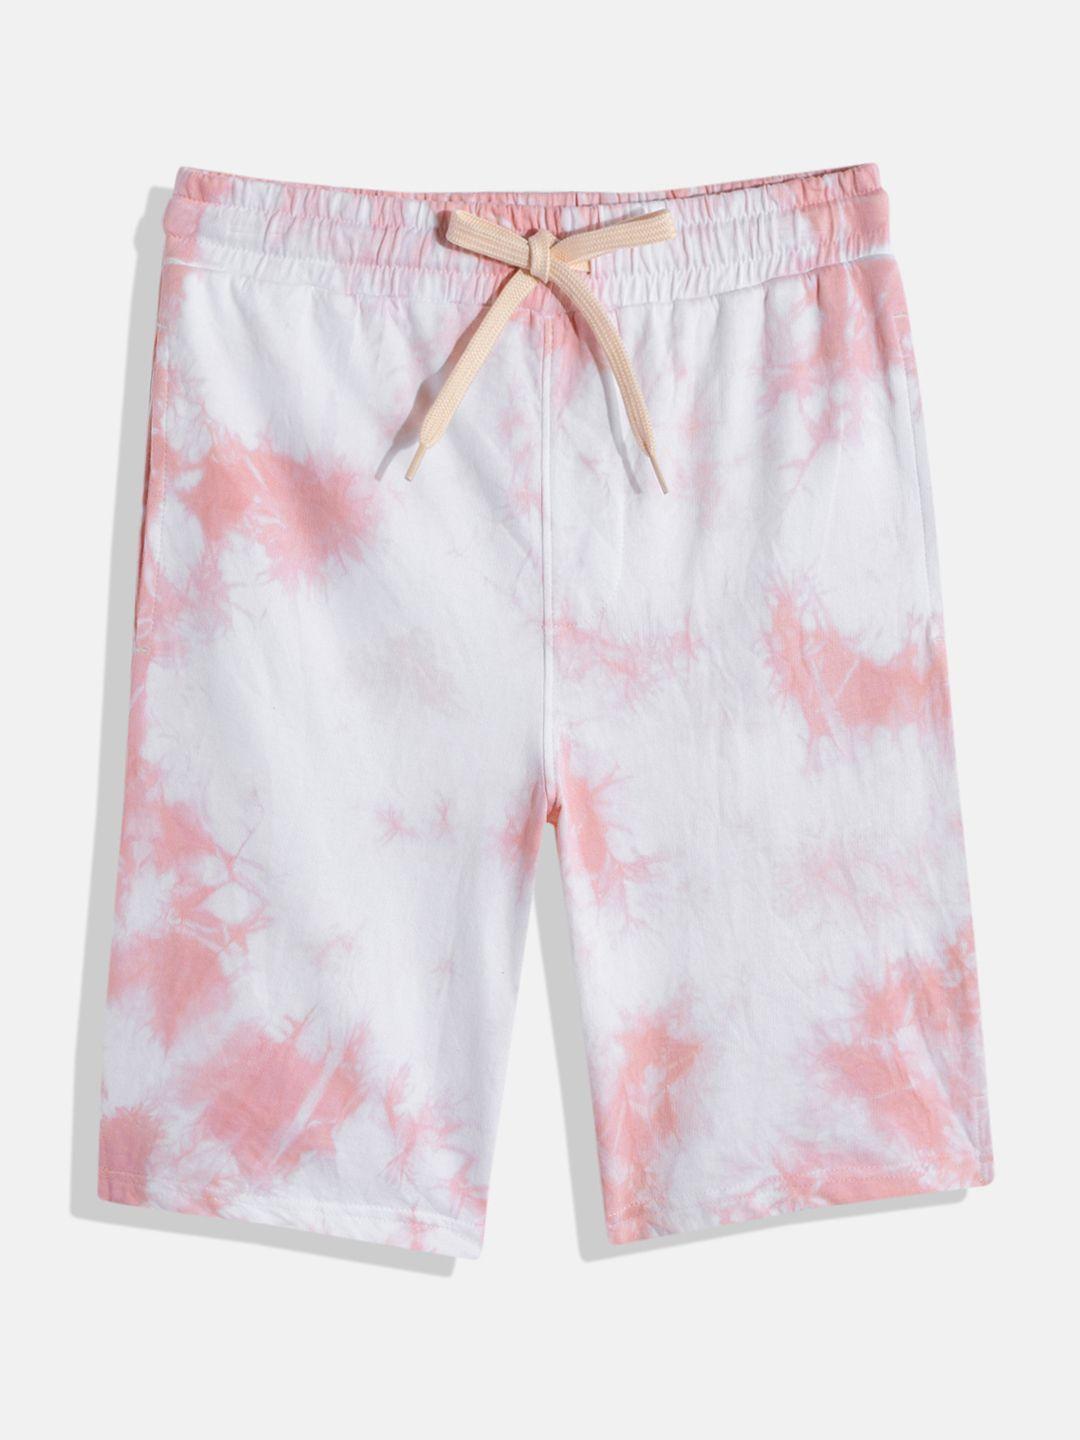 m&h juniors boys white and pink abstract printed pure cotton shorts